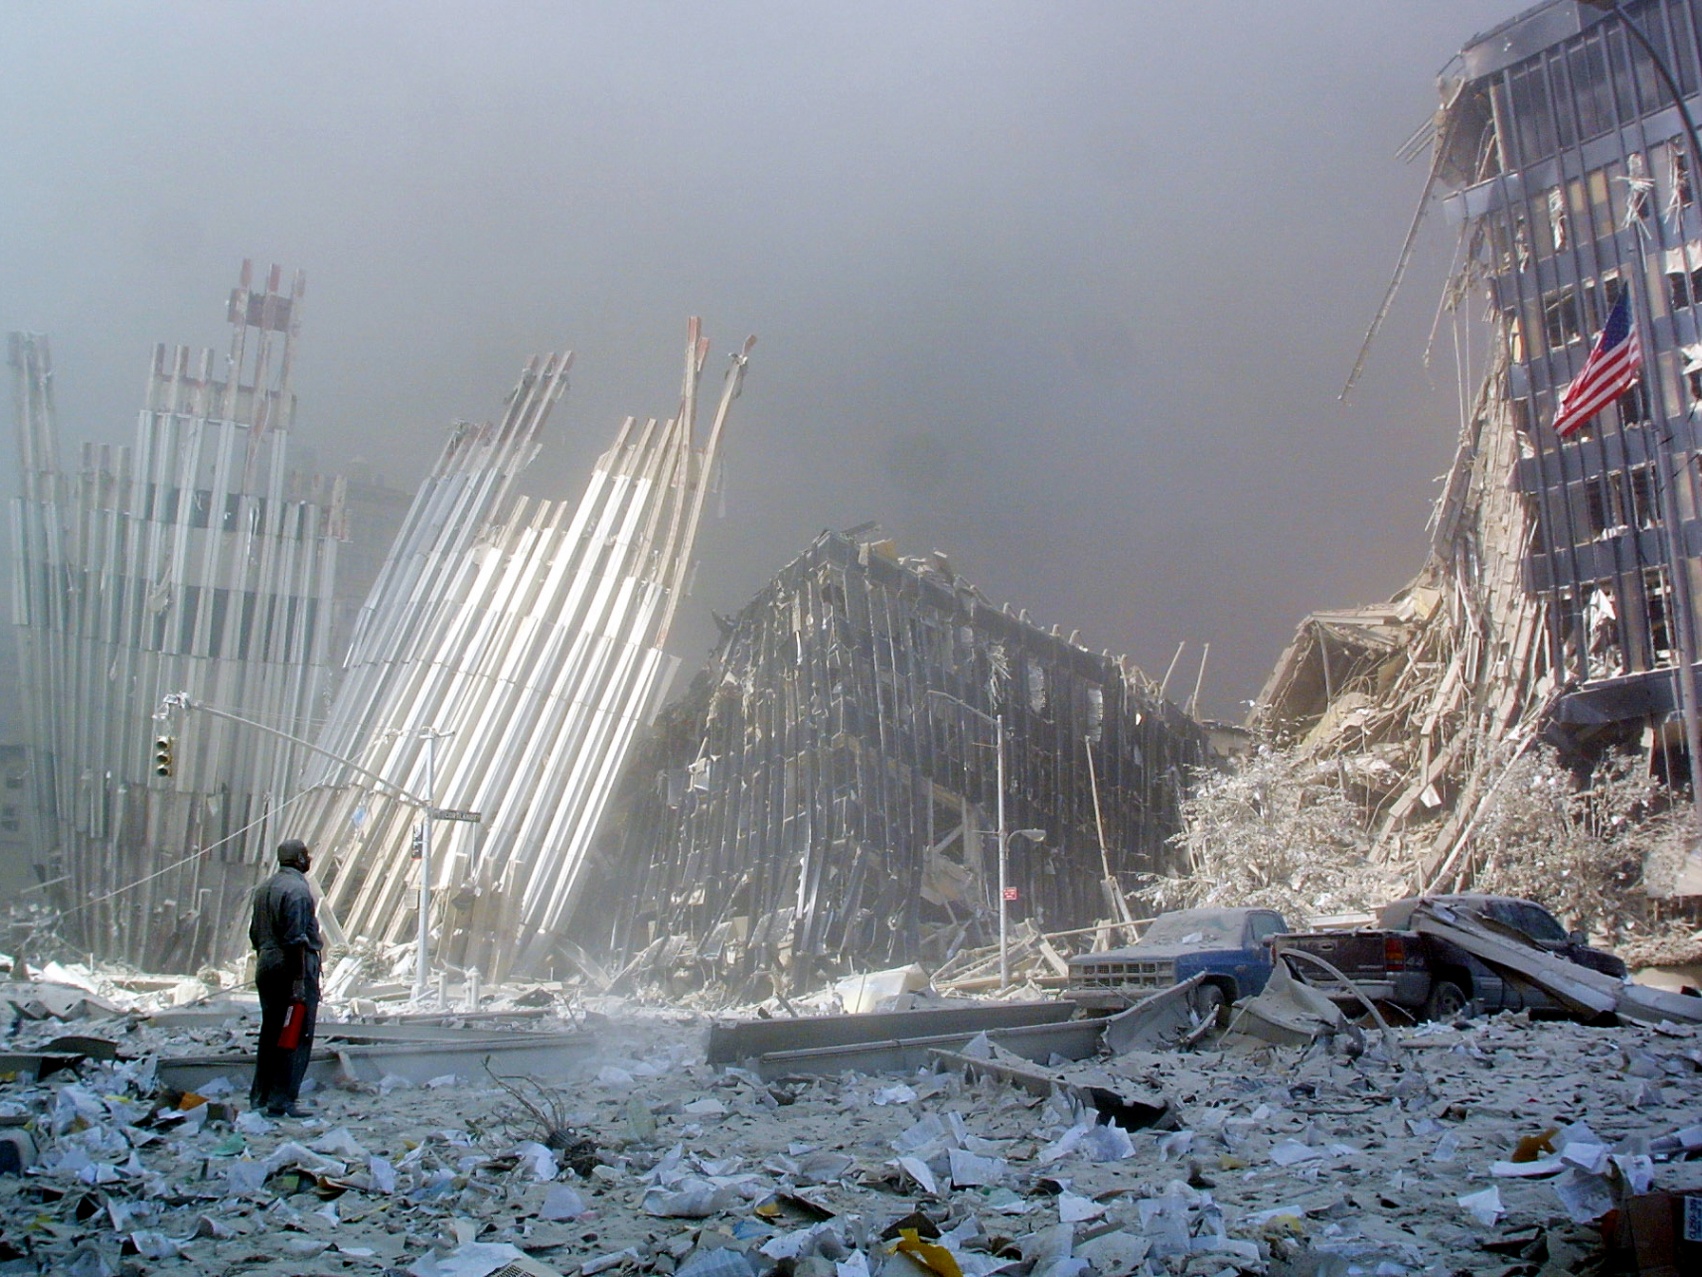 In many ways, the U.S. recovered quickly from 9/11‘s shattering impact.